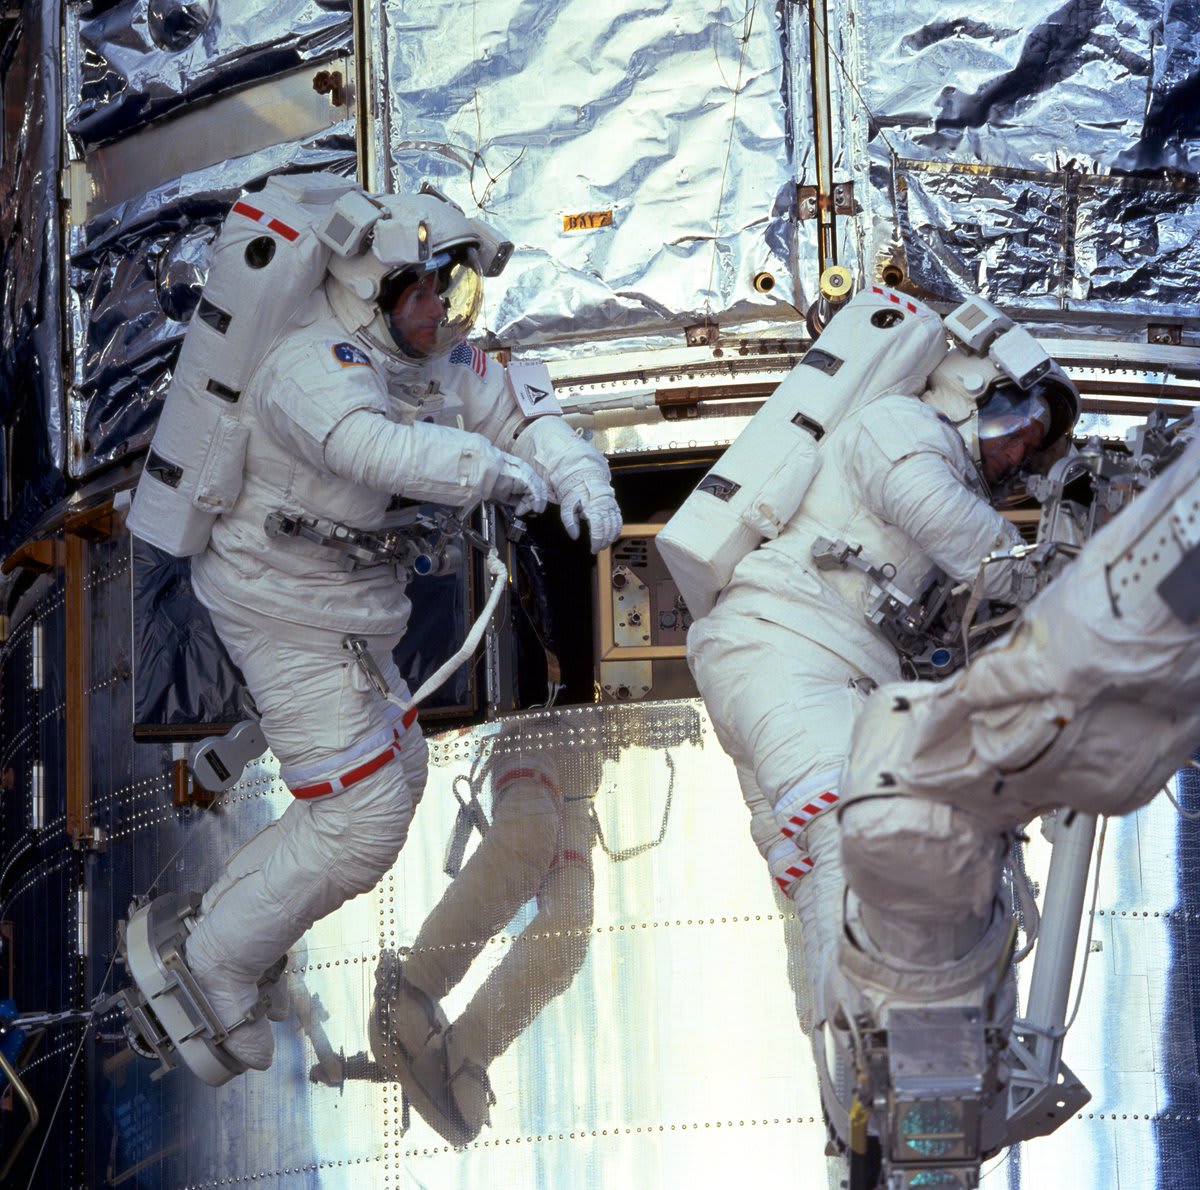 OTD 20 years ago: 23 December 1999, NASA astronaut Mike Foale and ESA's @Astroclaude Nicollier (CH) began the second EVA of the STS-103 mission, which lasted into Christmas Eve, 24 December